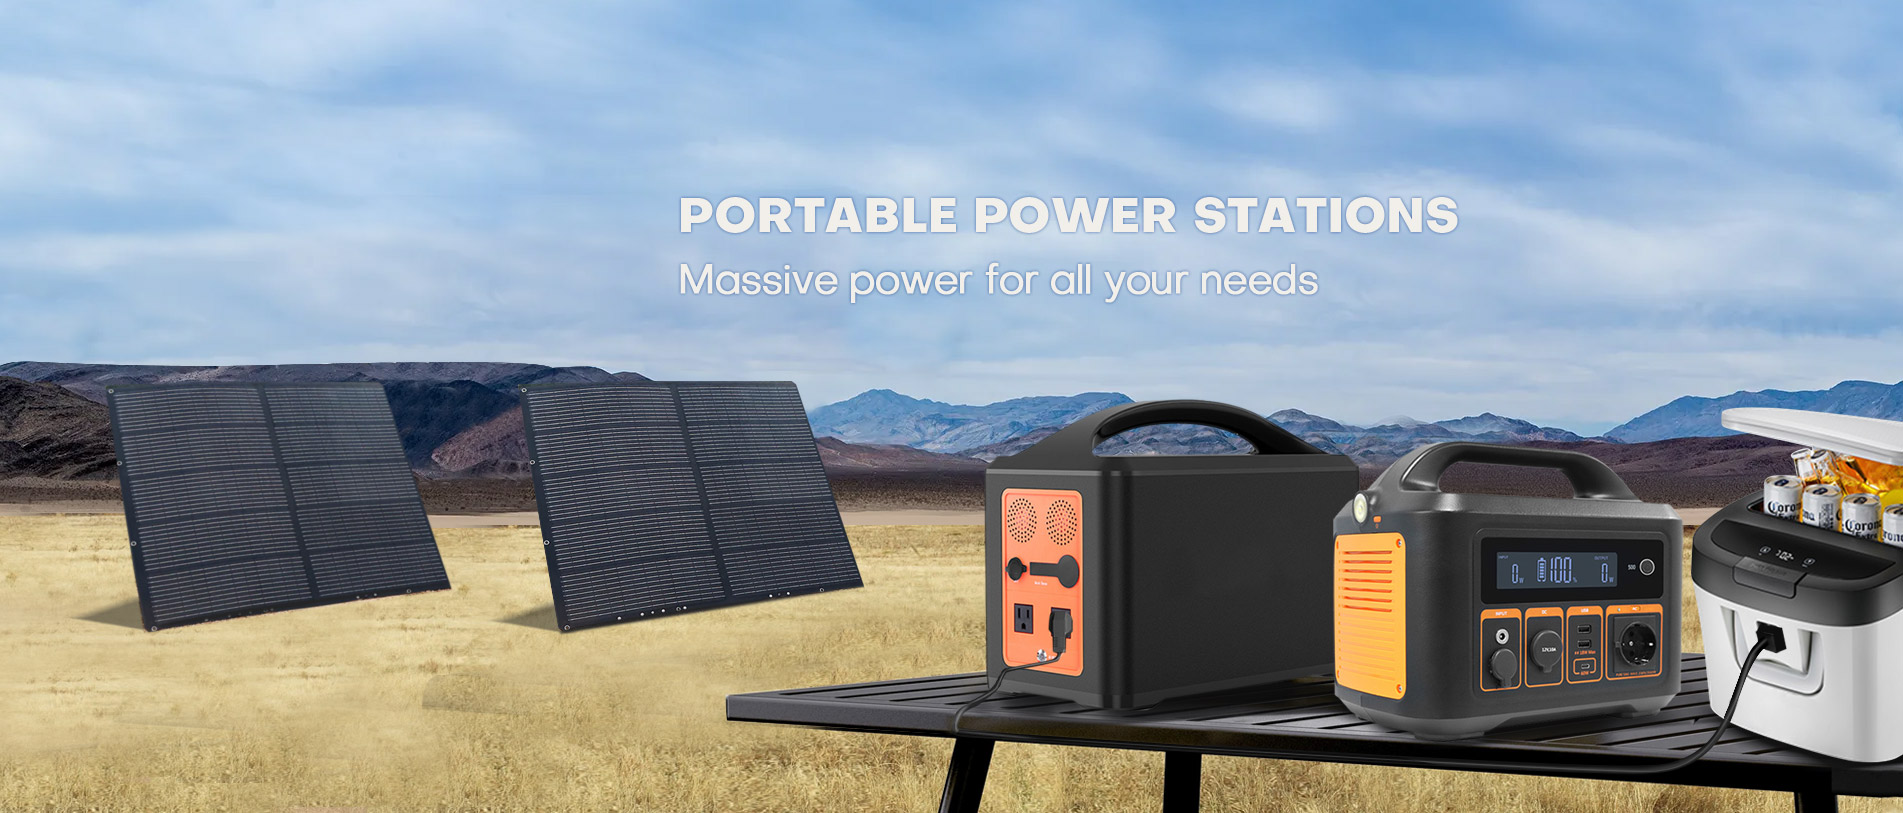 PORTABLE POWER STATIONS